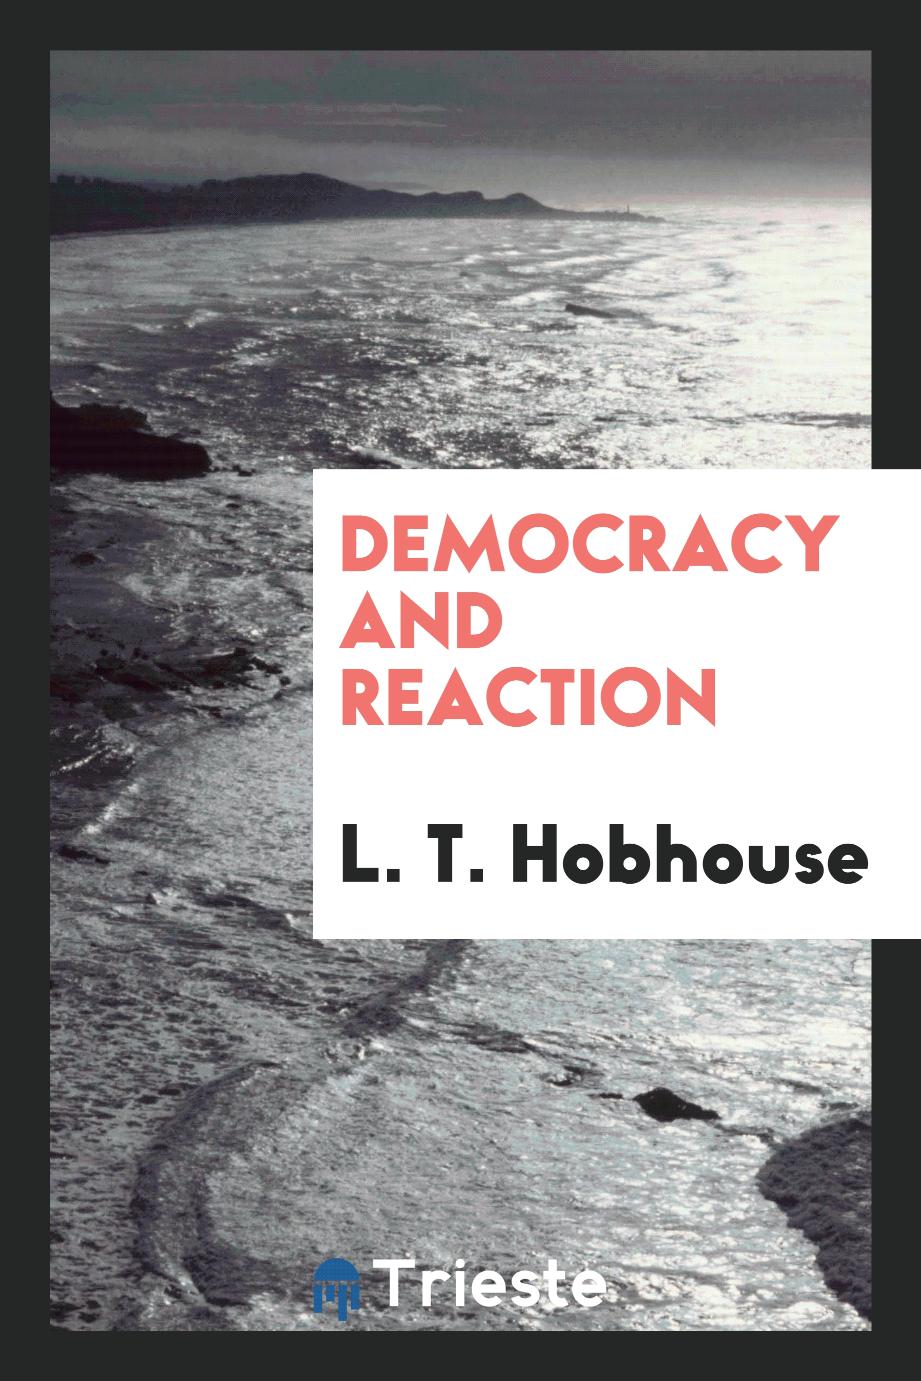 Democracy and reaction